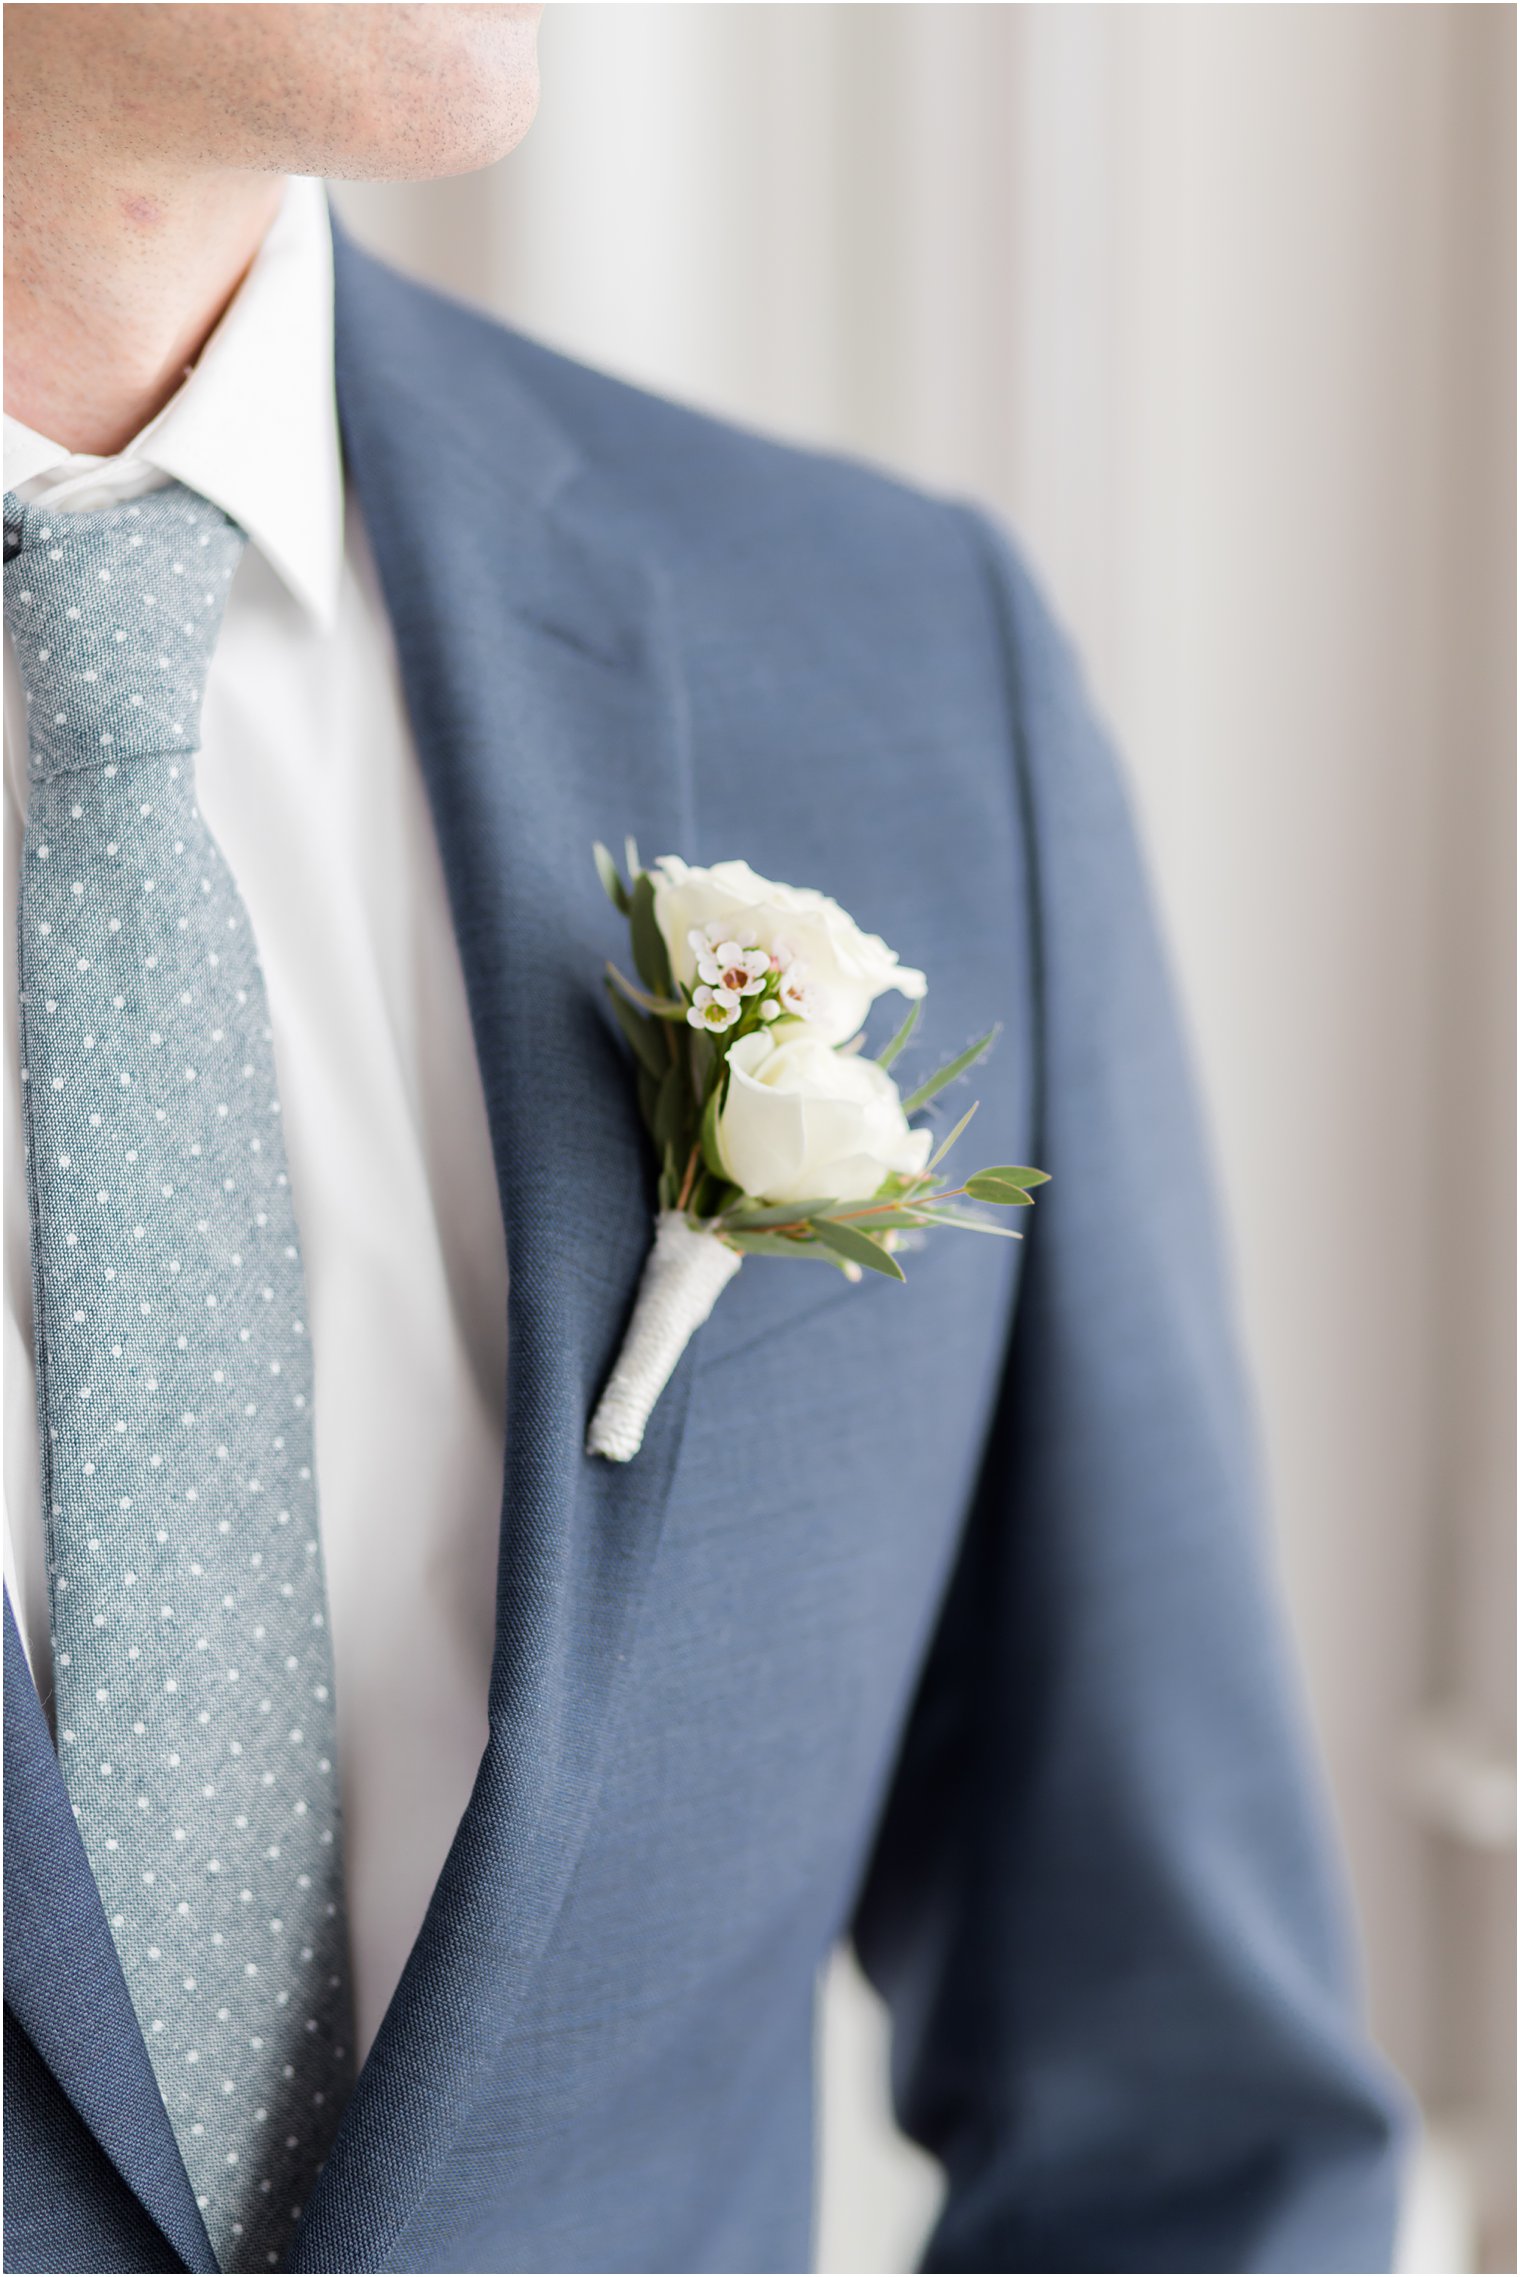 groom in navy suit with white boutonnière 